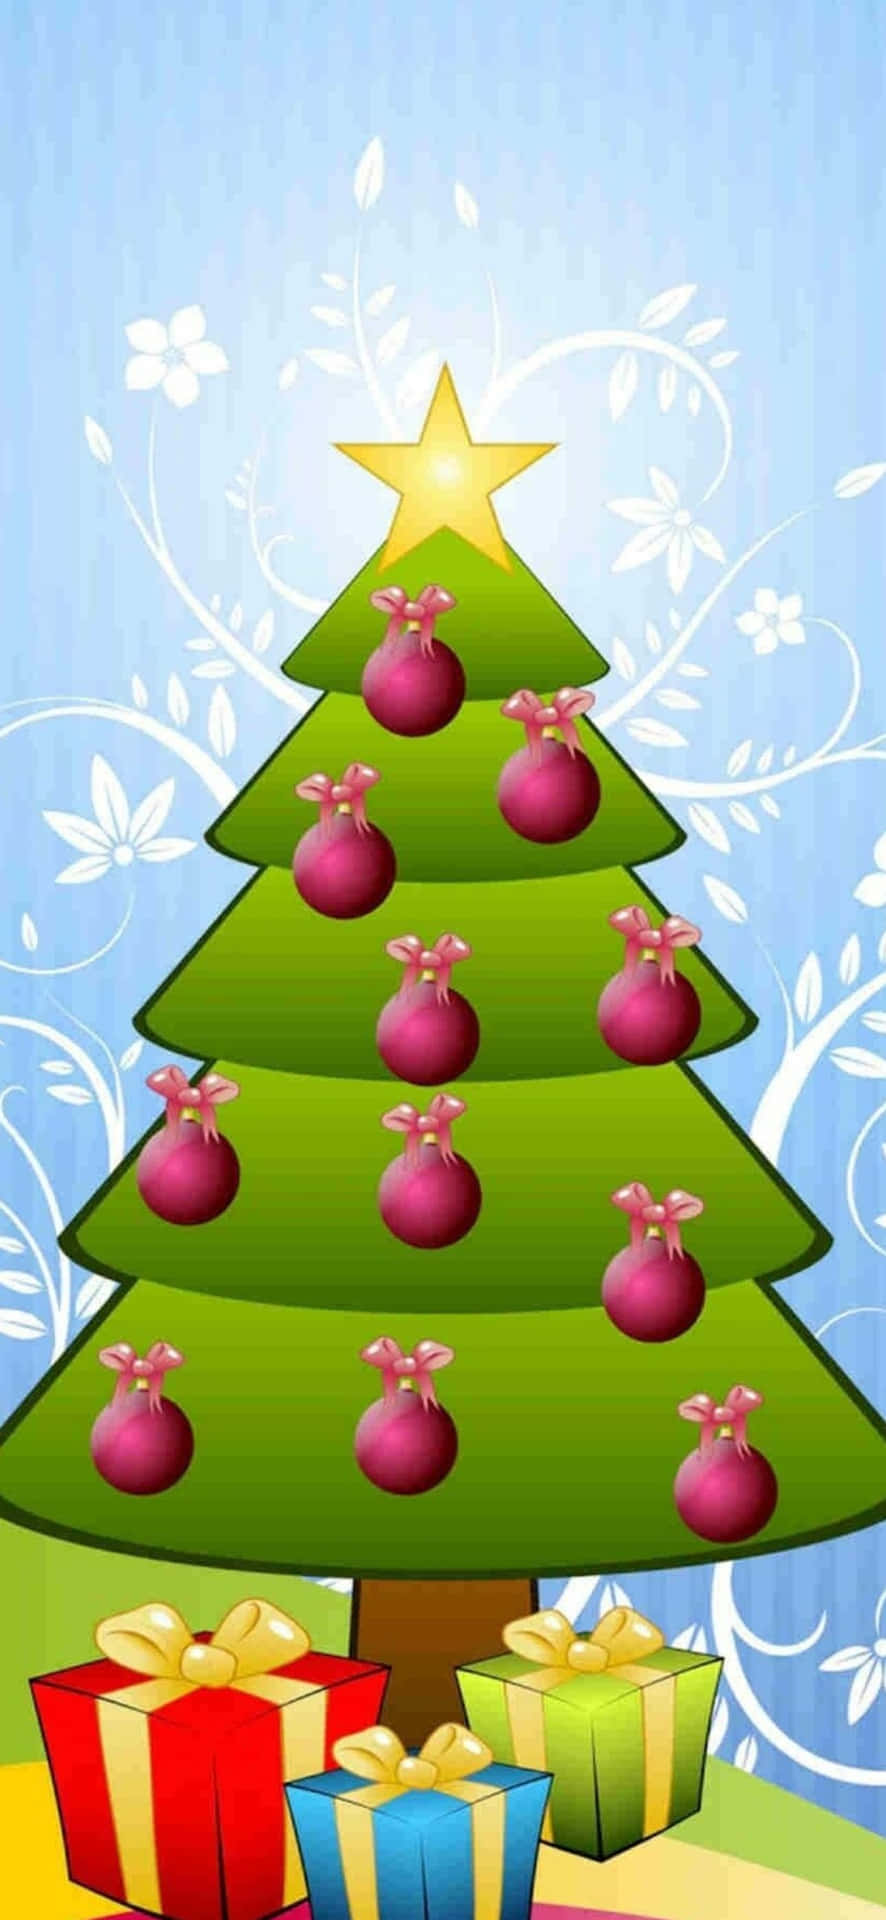 Download Celebrate the Spirit of Christmas with a Festive iPhone